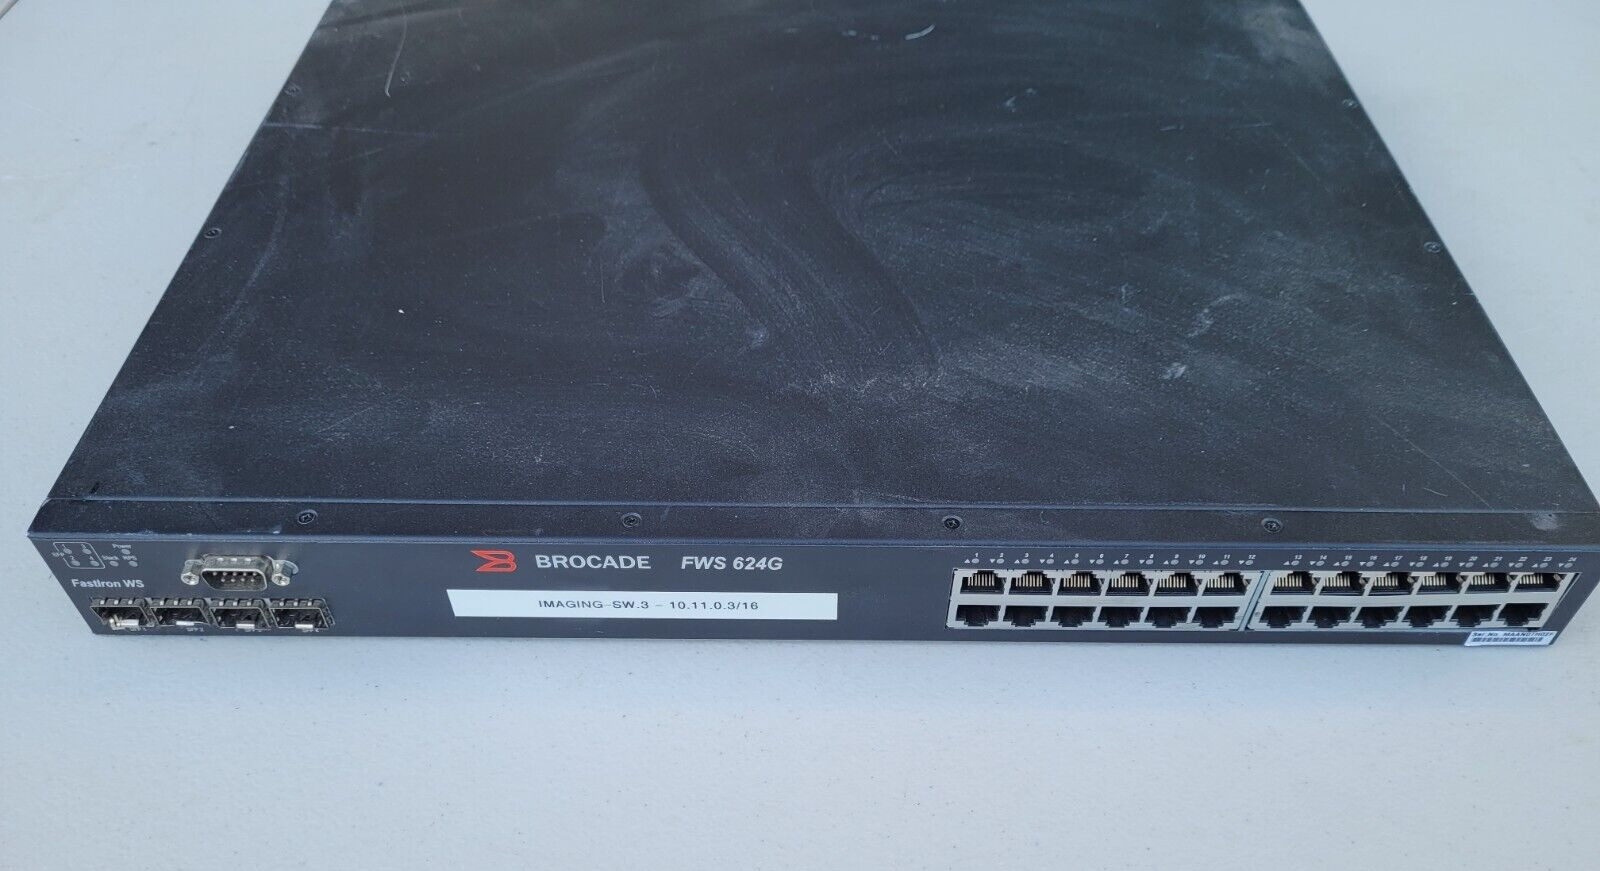 BROCADE Foundry FWS624G Gigabit Switch 24 1000BaseT, Tested and Working